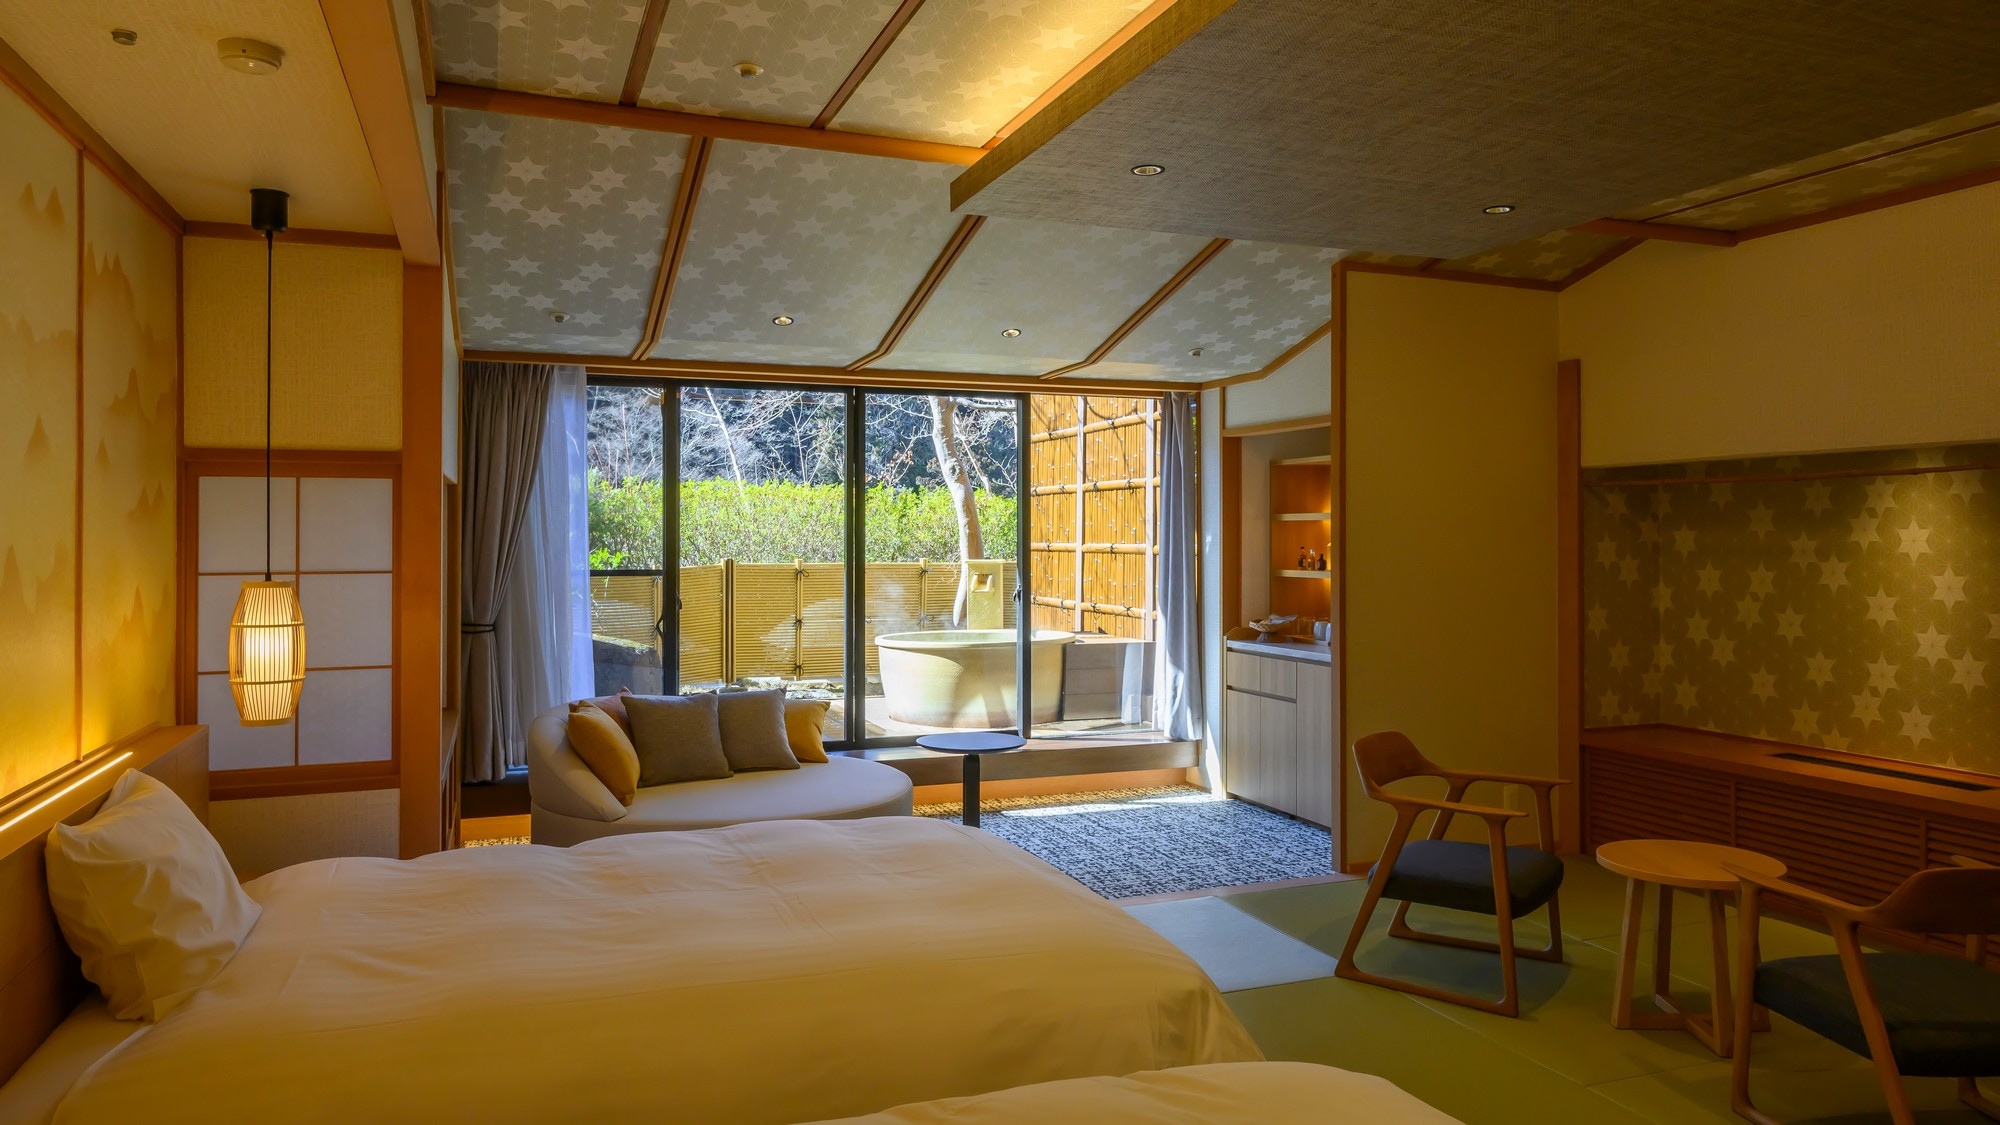 A guest room with an open-air bath on the 4th floor of Manyokan, which was reopened in February 2023. A Japanese-style bed is provided in a Japanese-style room with tatami mats.